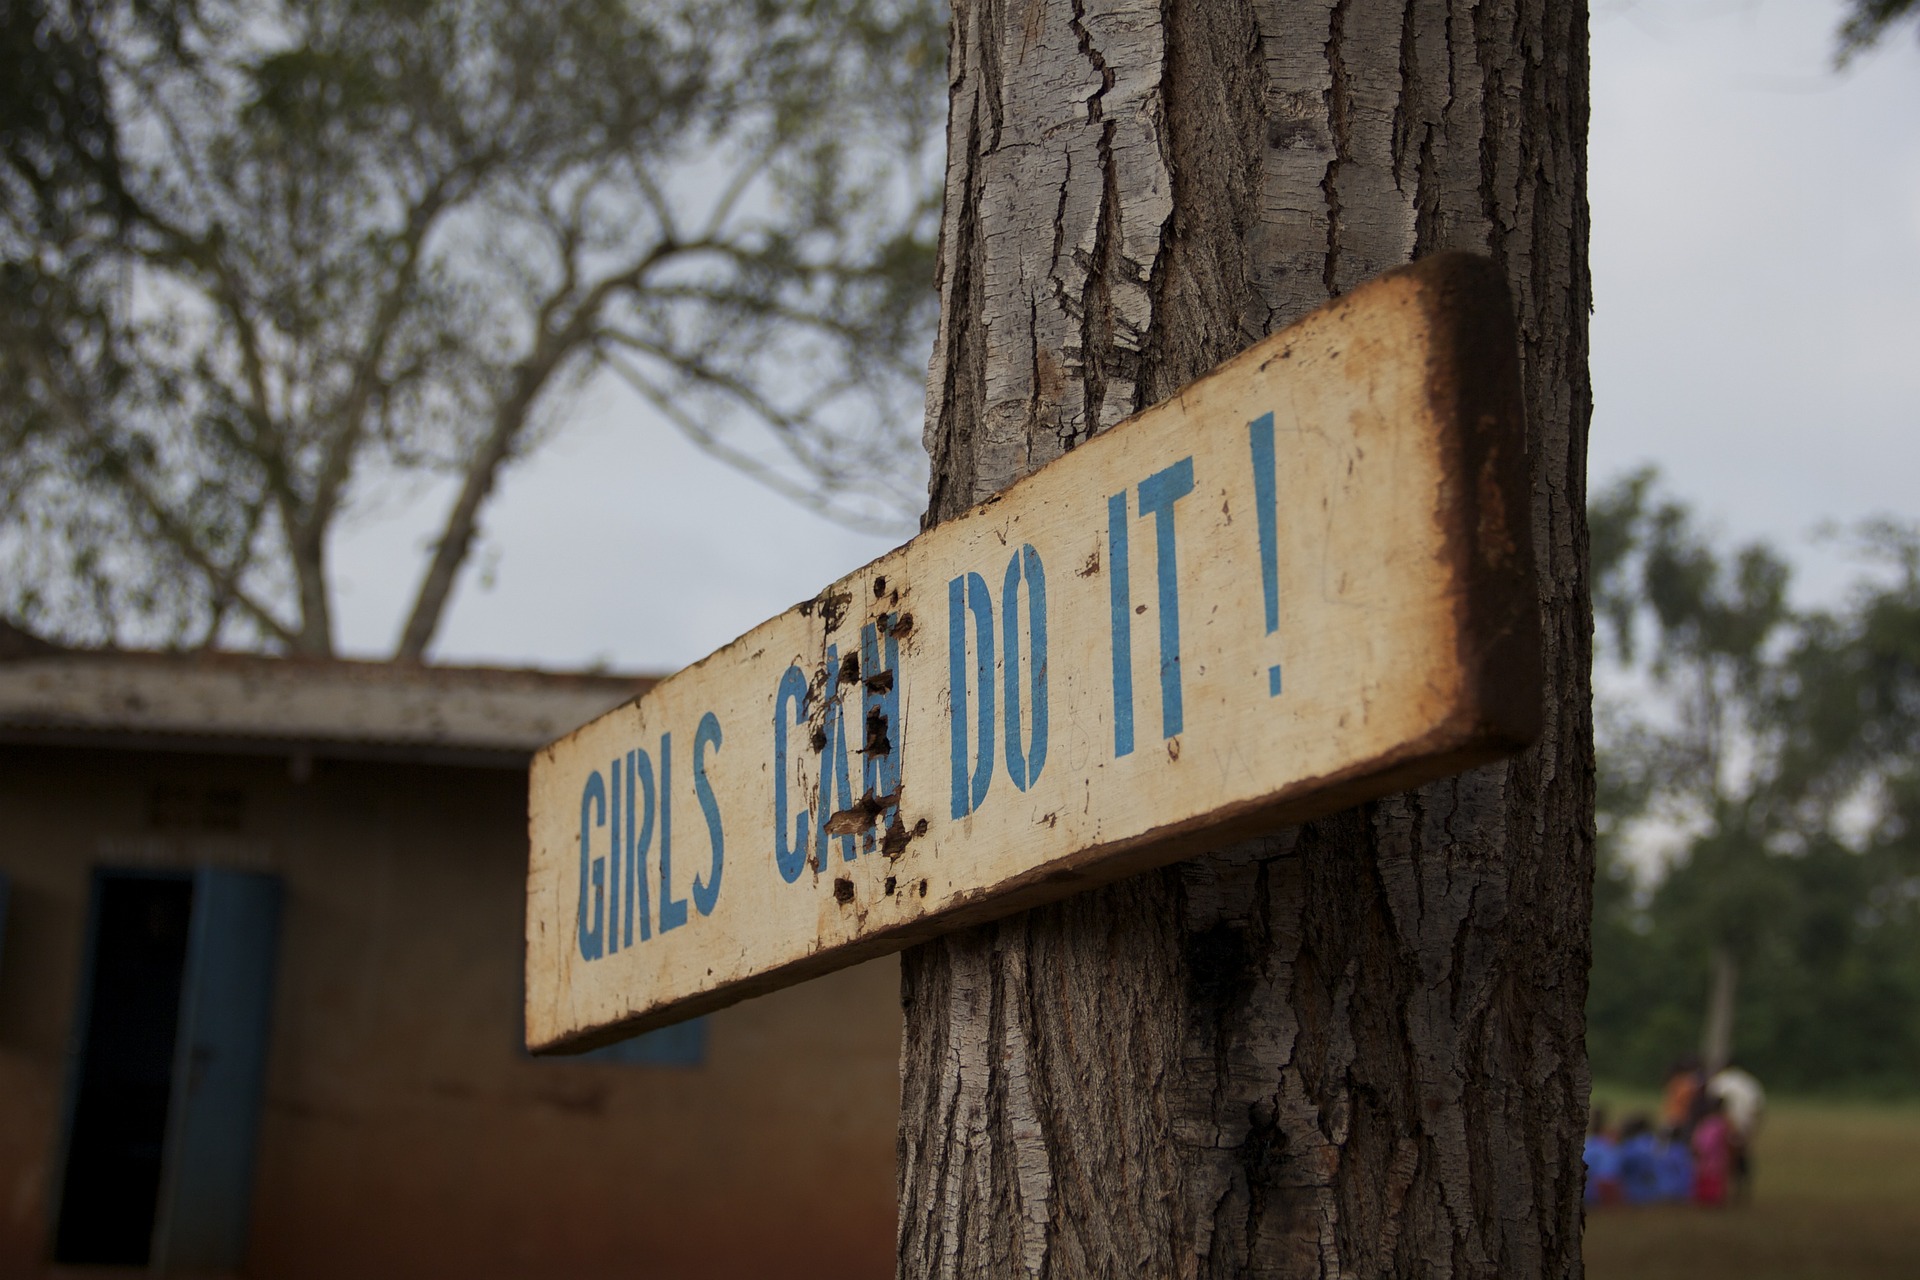 A sign nailed to a tree horizontally reads 'Girls can do it'.